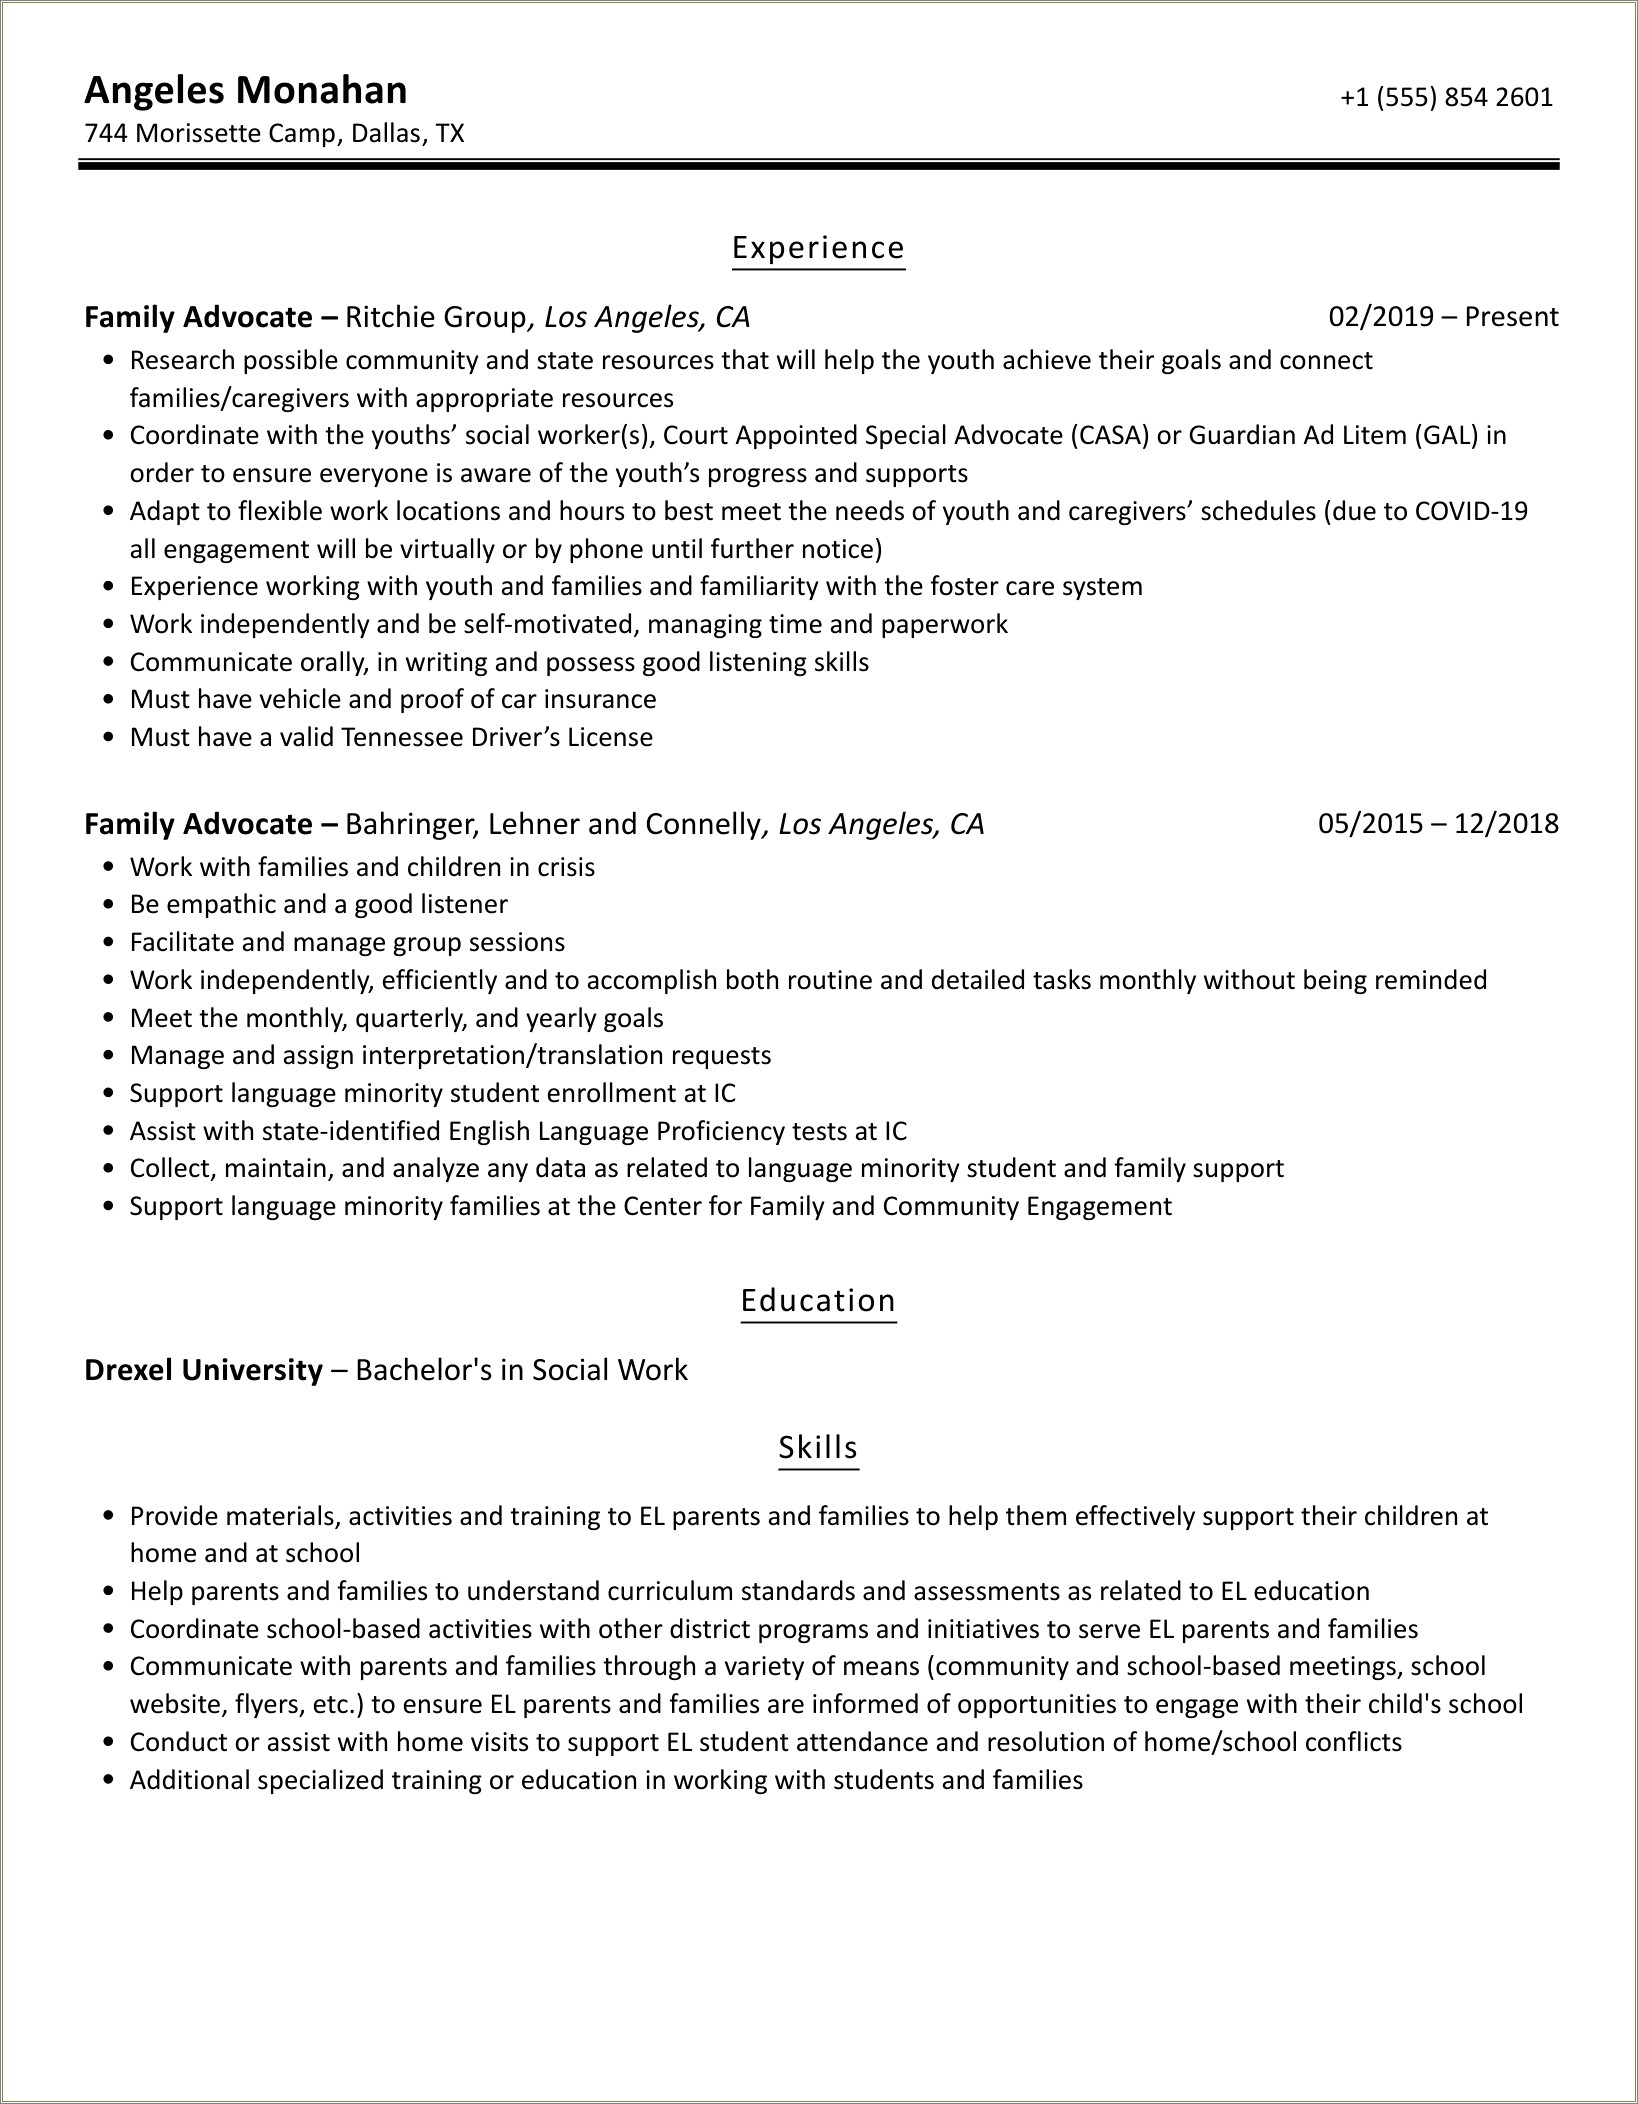 Resume Example Of A Family Advocate